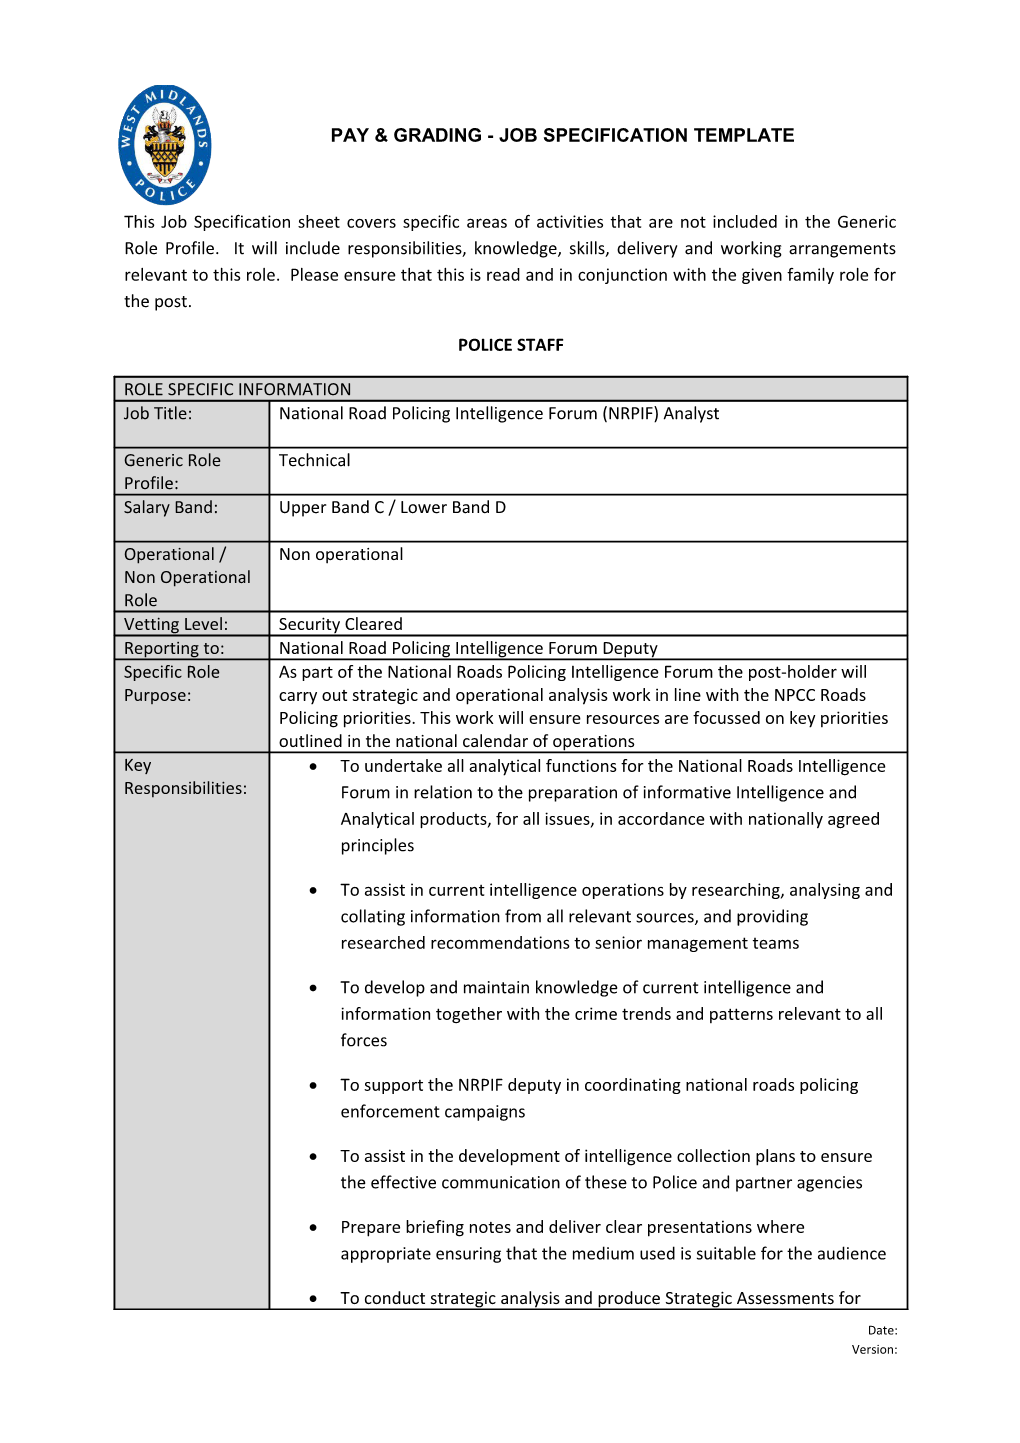 Pay & Grading - Jobspecification Template